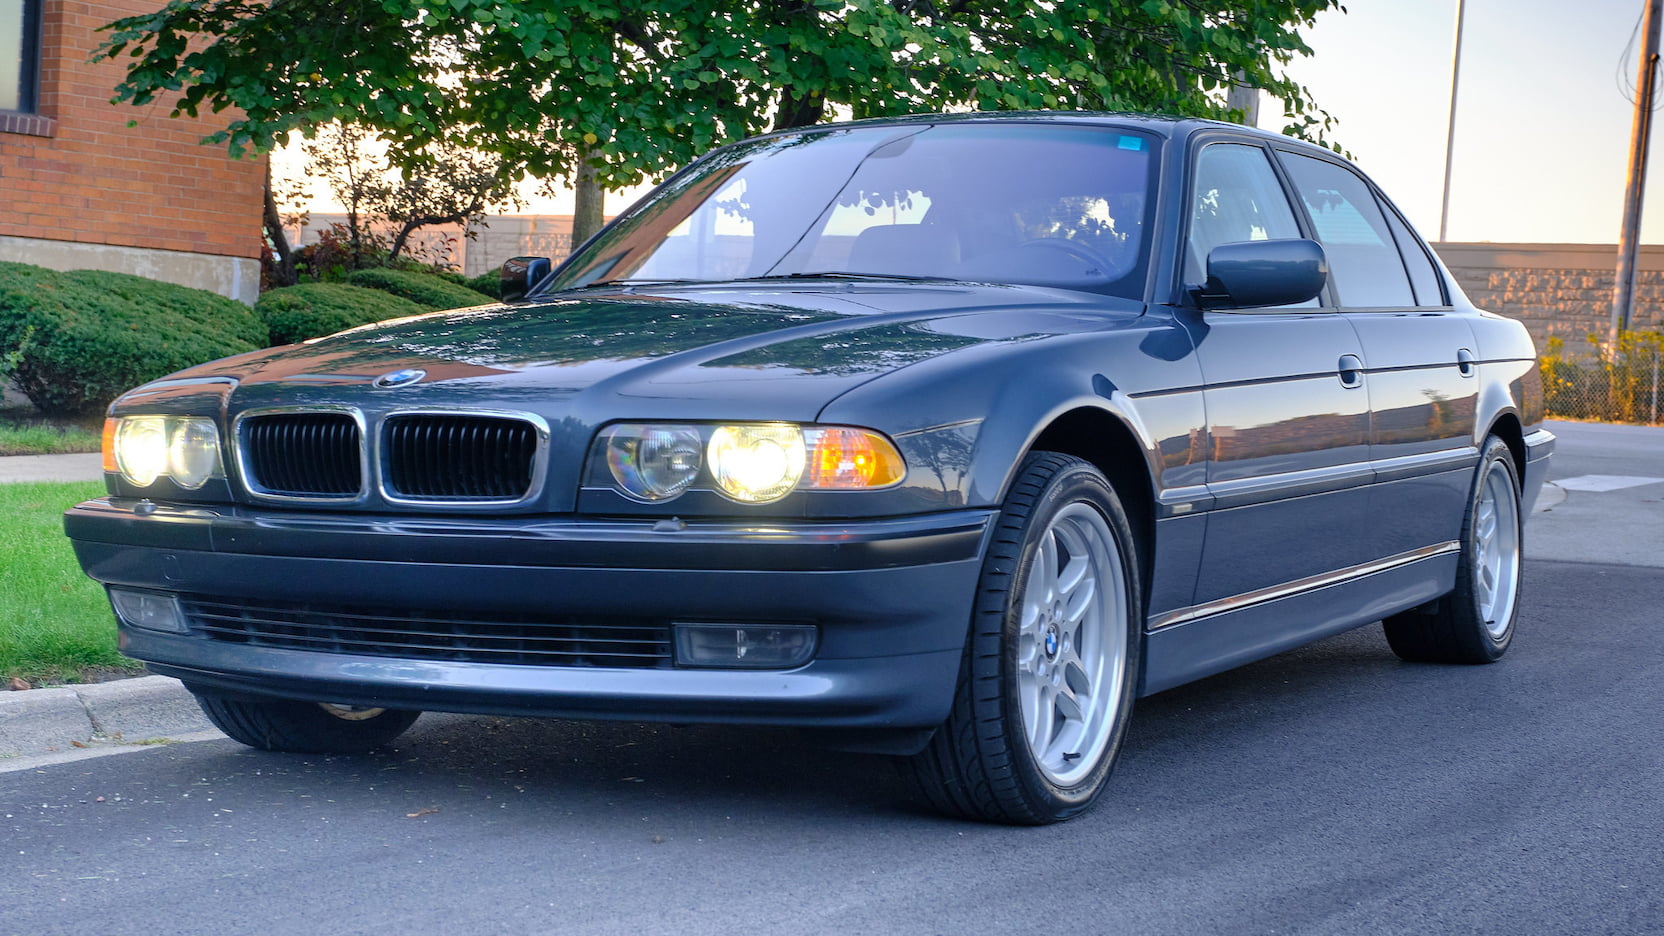 2001 BMW 740il at Chicago 2022 as F331 - Mecum Auctions